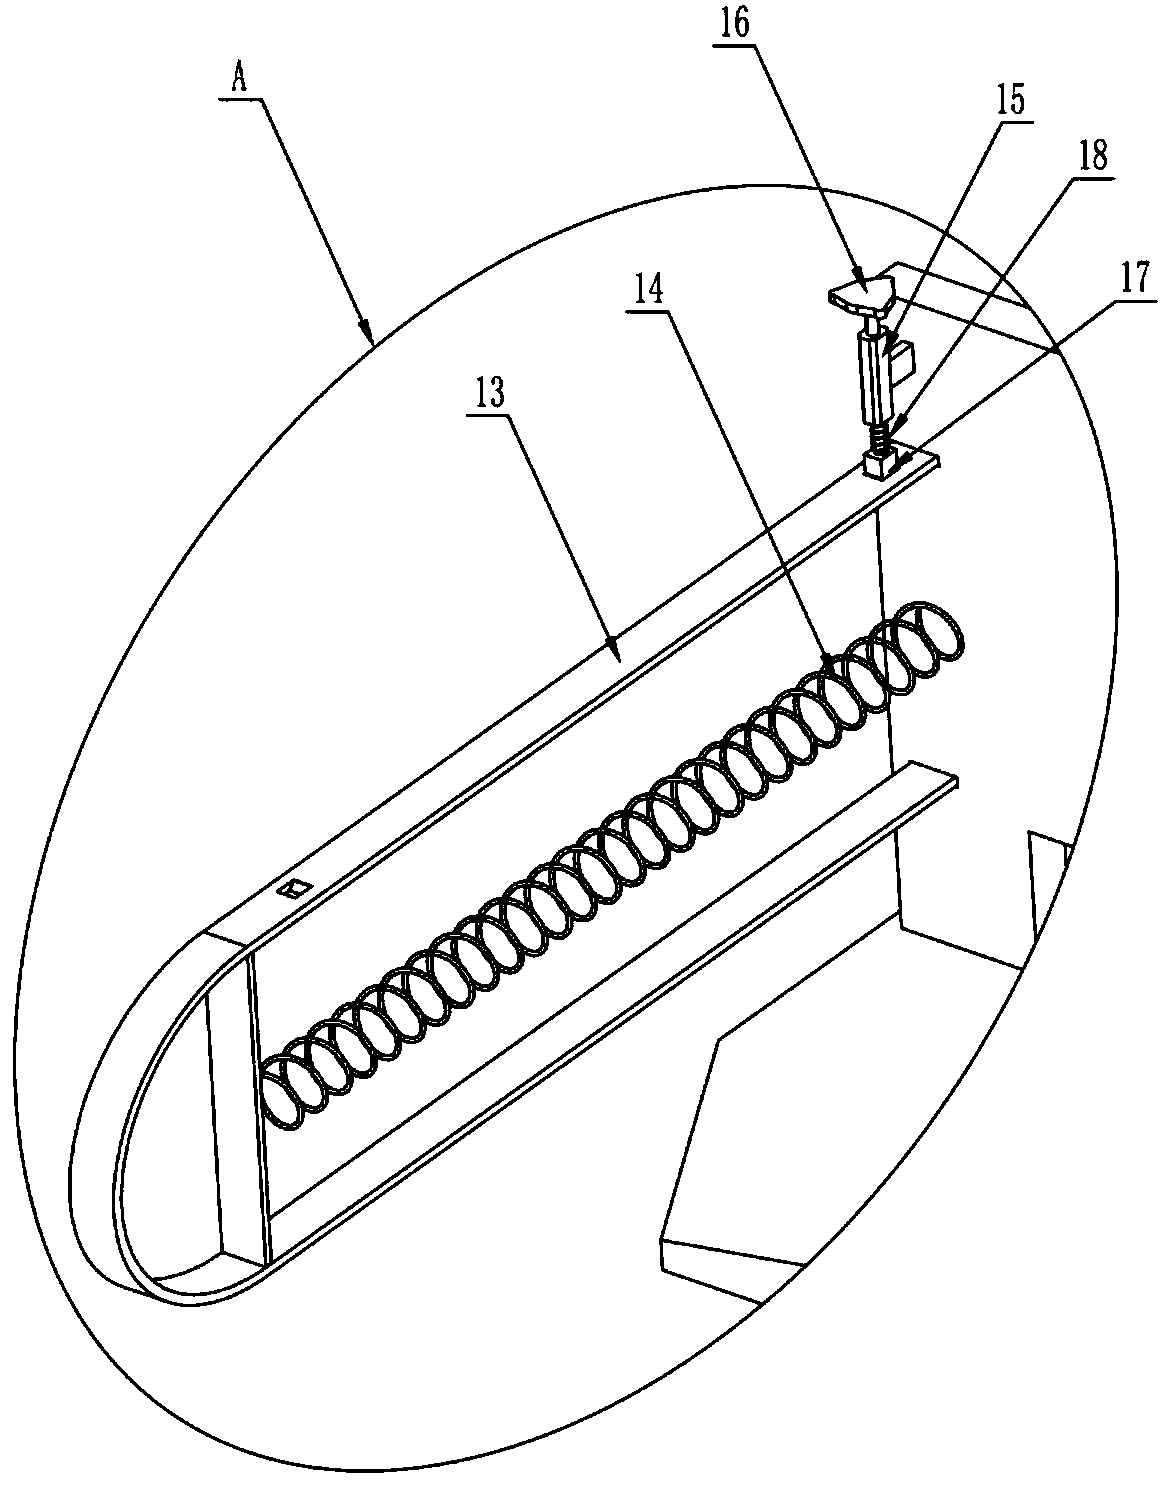 Cow hoof trimming assisted turnover device for animal husbandry breeding